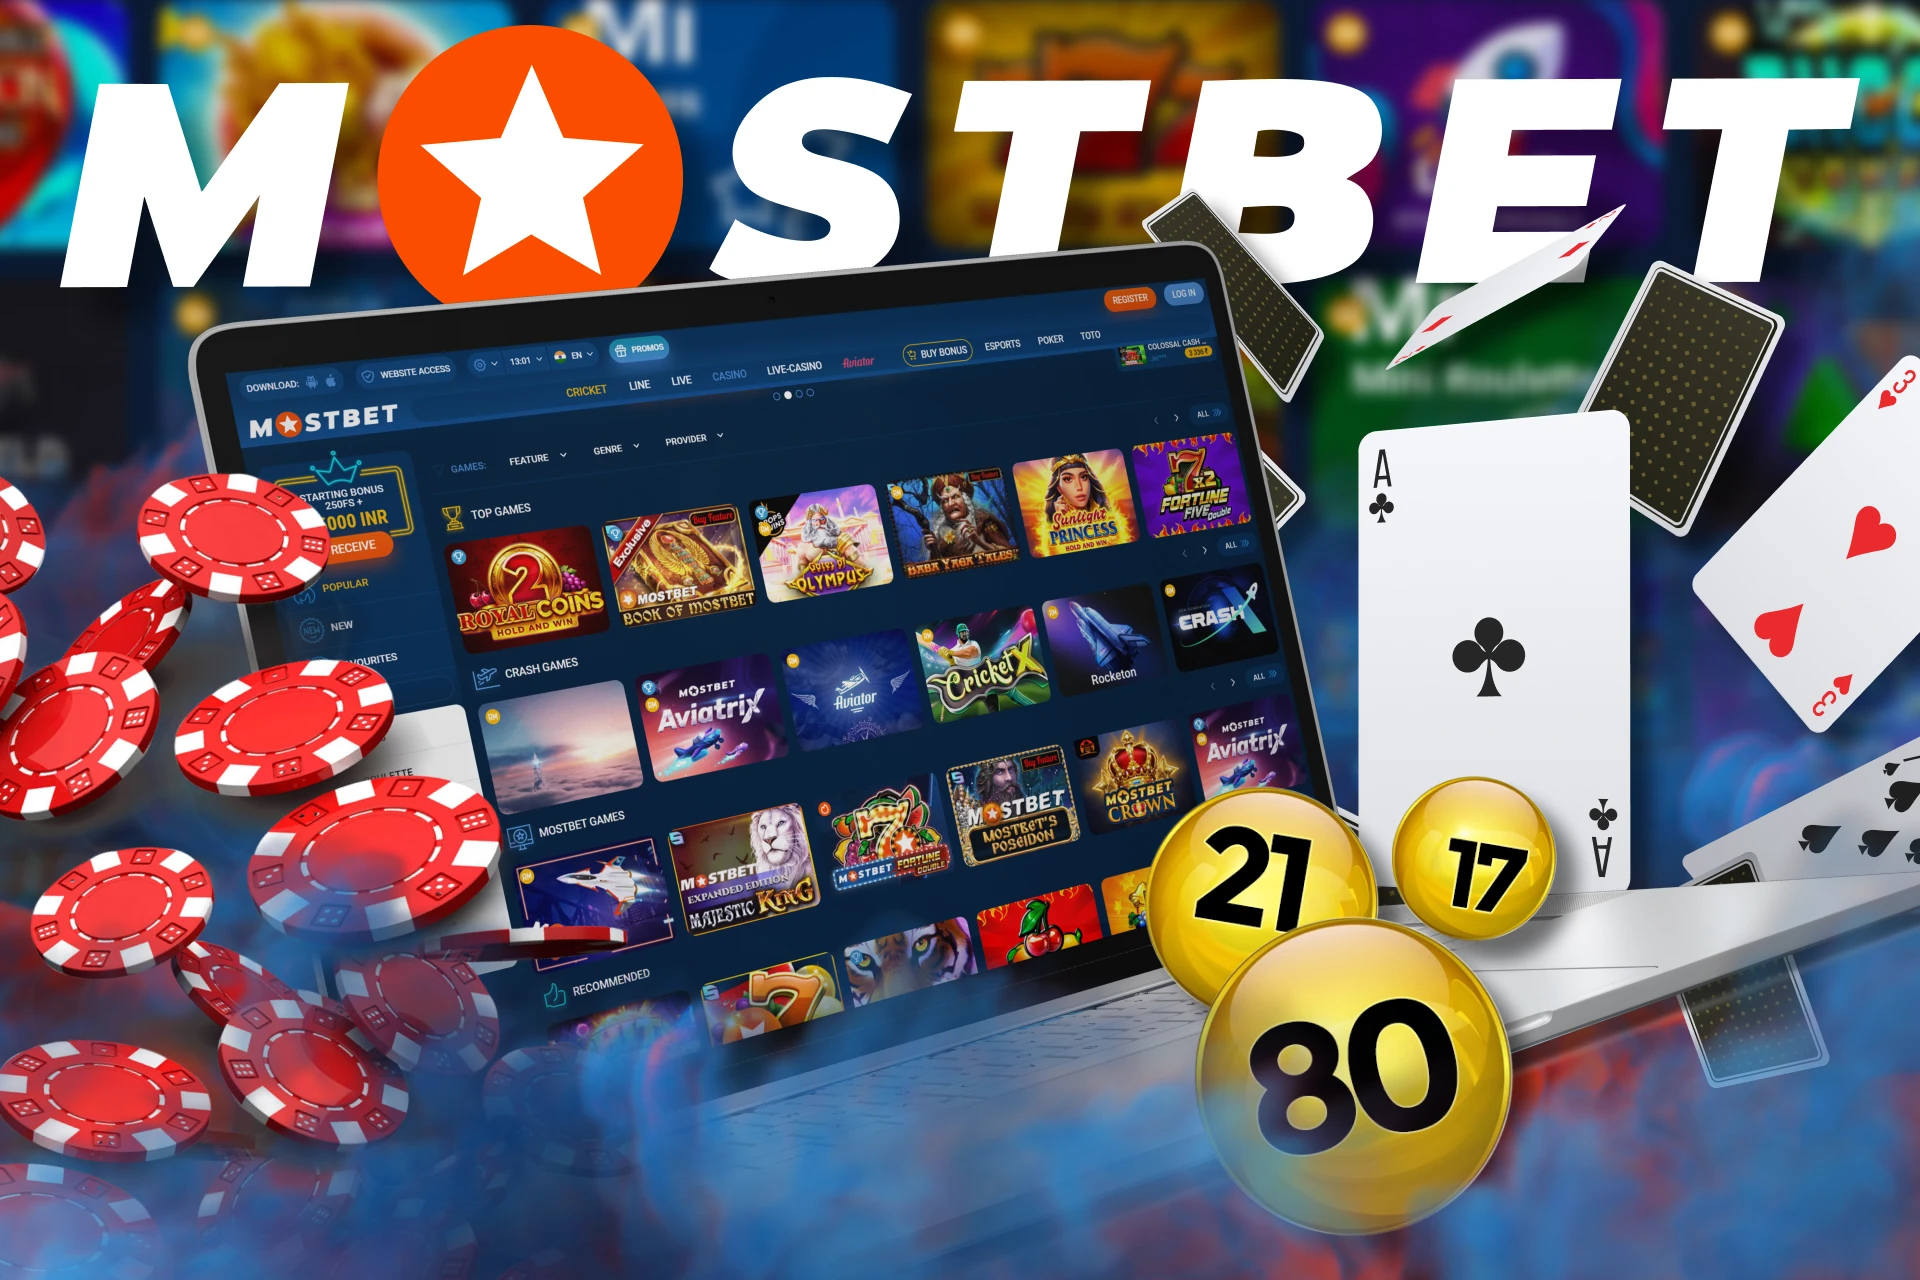 Play different casino games at Mostbet.